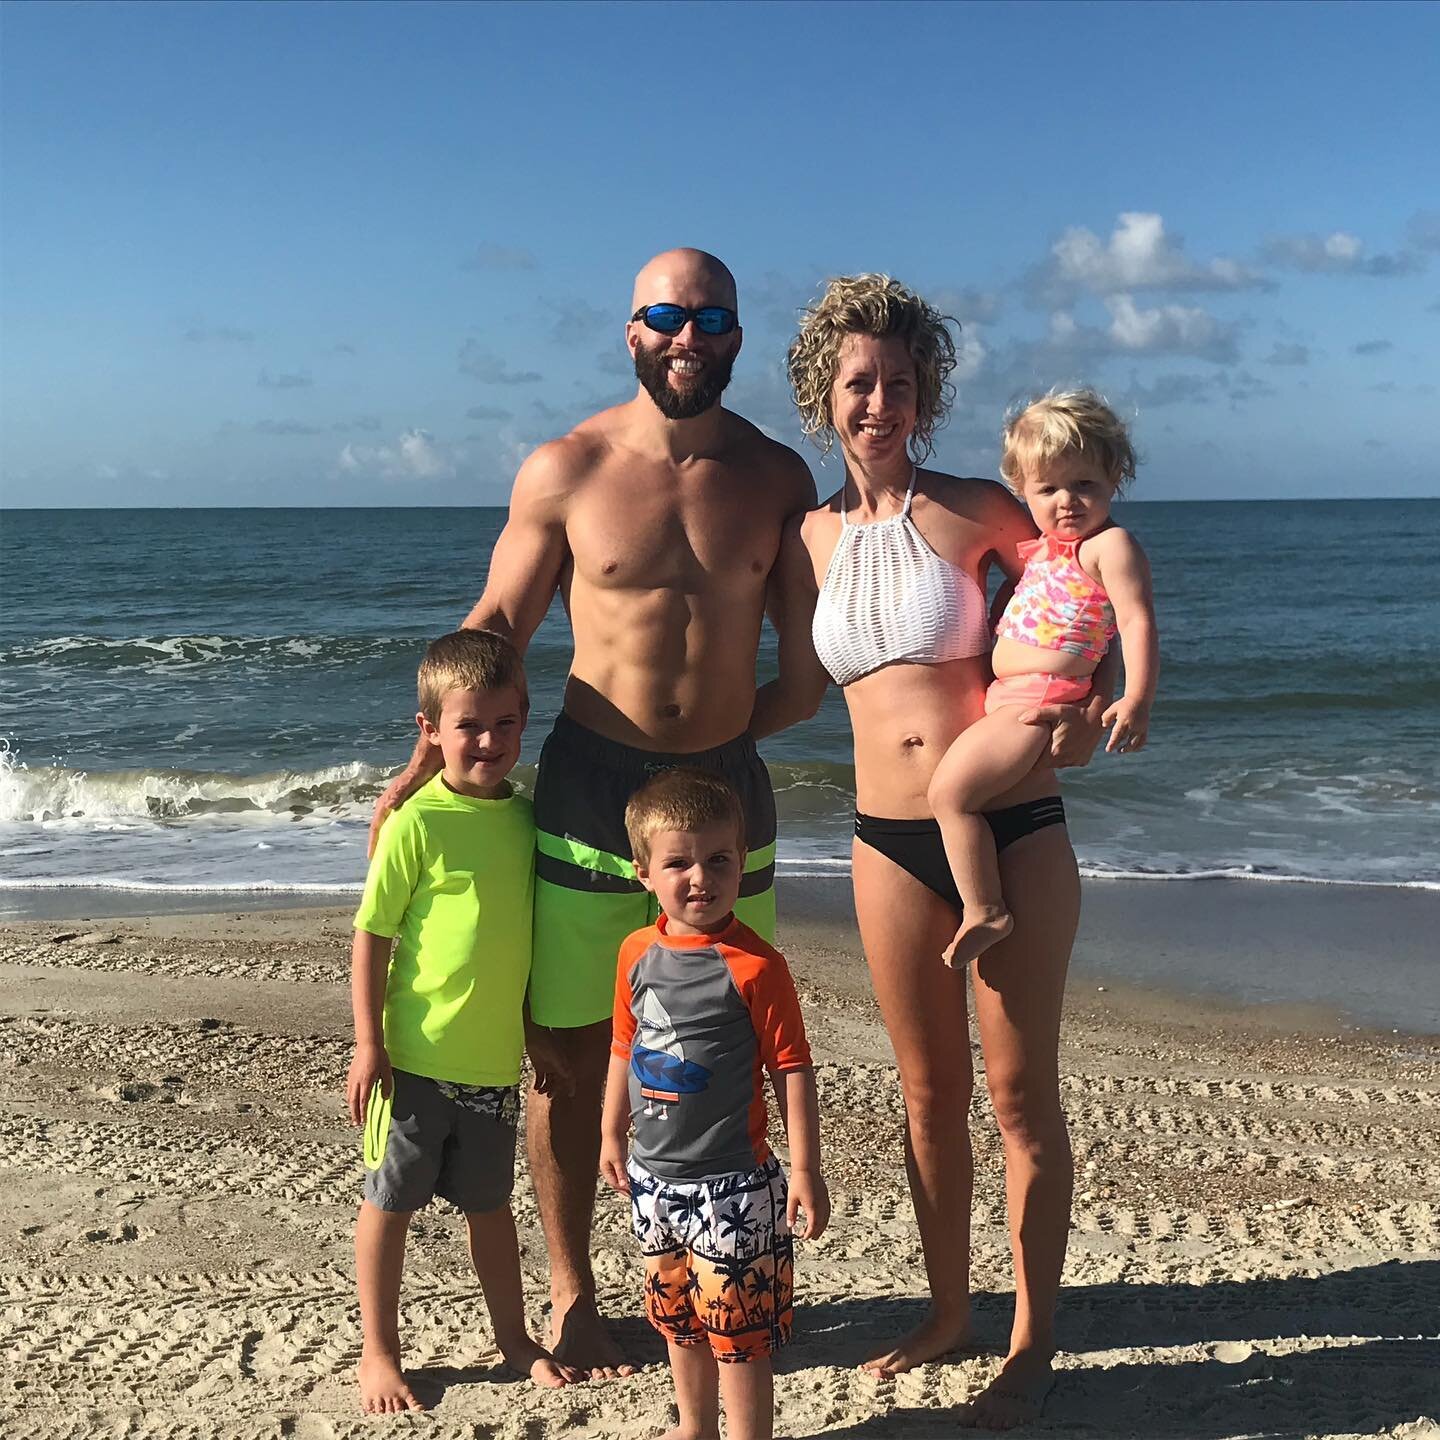 Having an awesome beach week! Managed to wrangle the kids up for .5 seconds to take this pic! 
#fatherhoodfitnessfinance#fitness#fitfam#fitfamily#dad#father#family#familytime#dadmode#dadlife#married#marriage#happilymarried#beardgame#wife#husband#coup